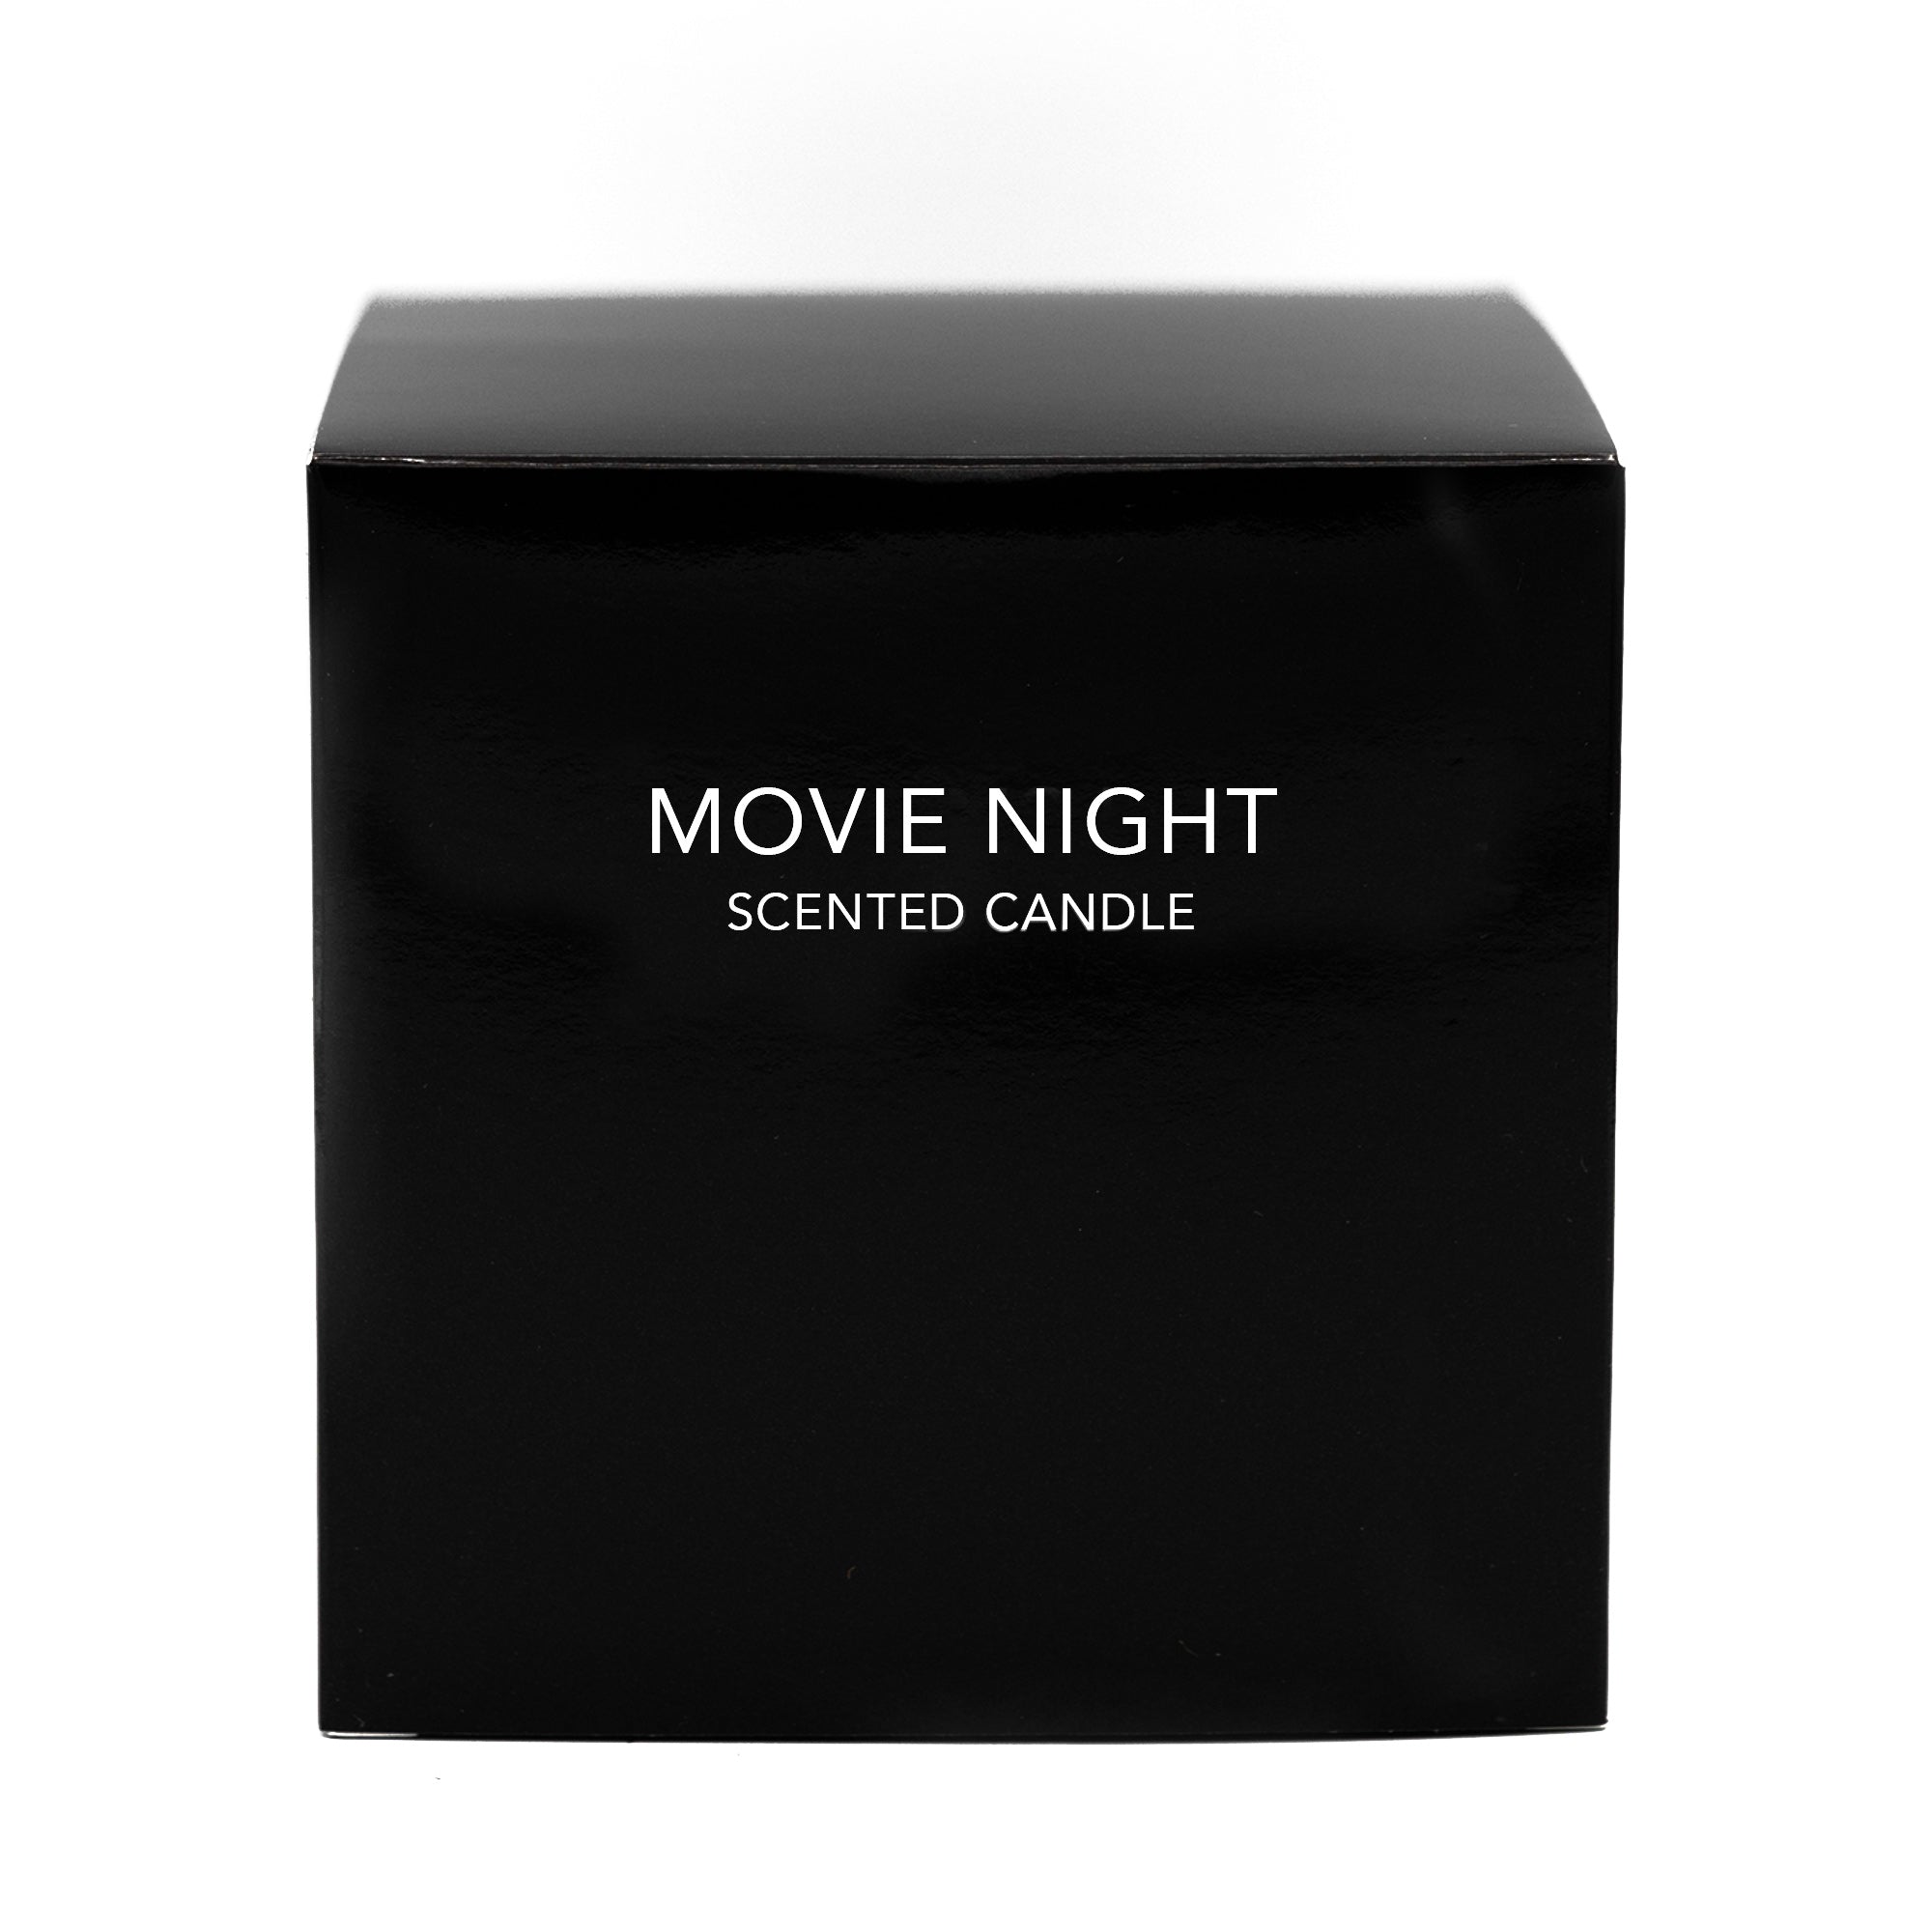 MOVIE NIGHT Scented Candle - Box